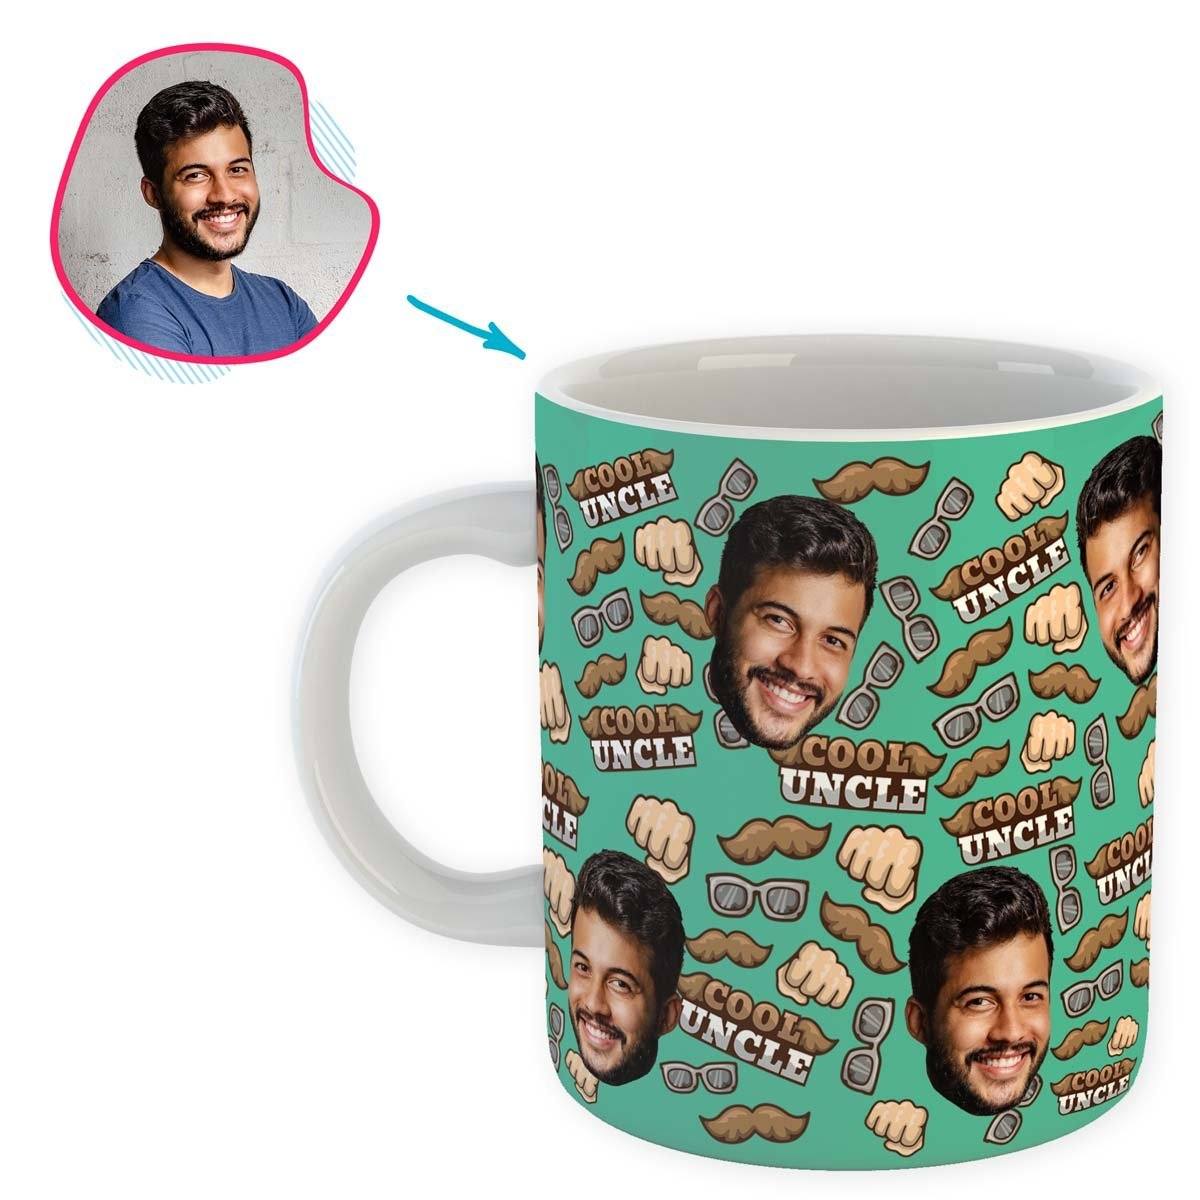 Mint Uncle personalized mug with photo of face printed on it